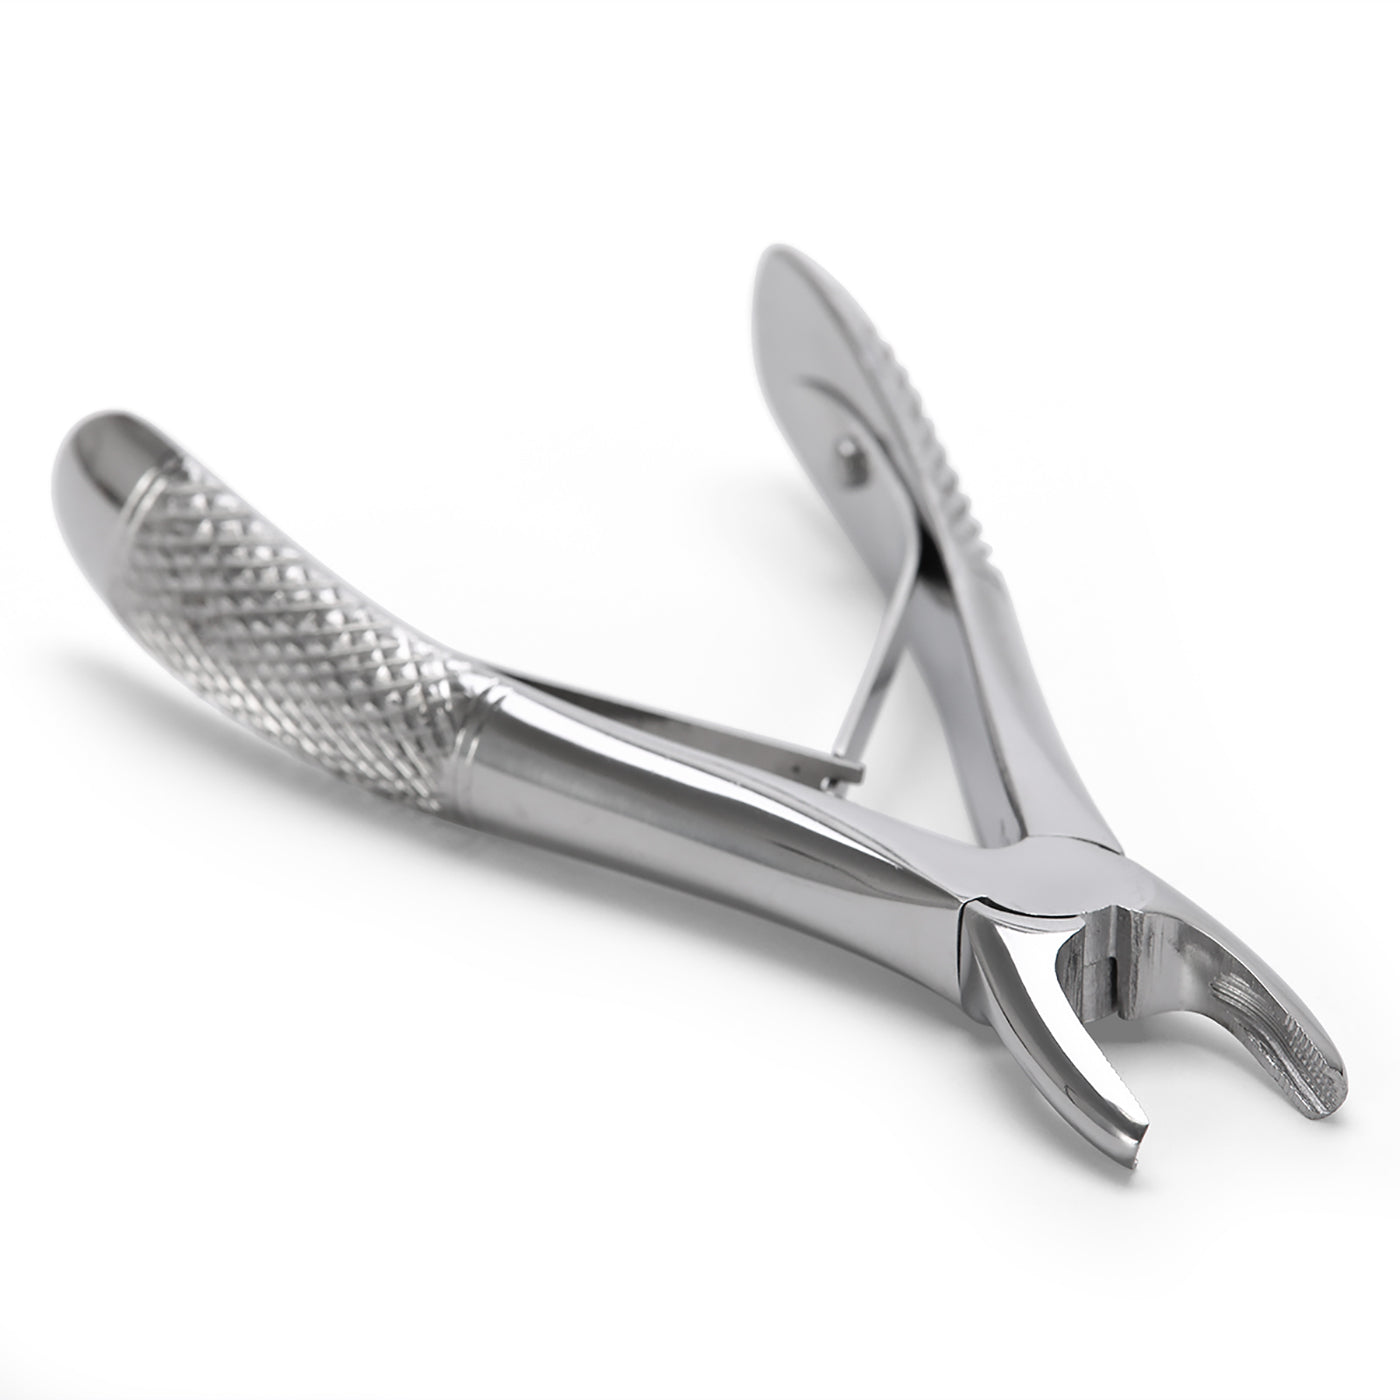 Dental Surgical Tooth Extraction Forceps Pliers for Children 7pcs/Set - azdentall.com